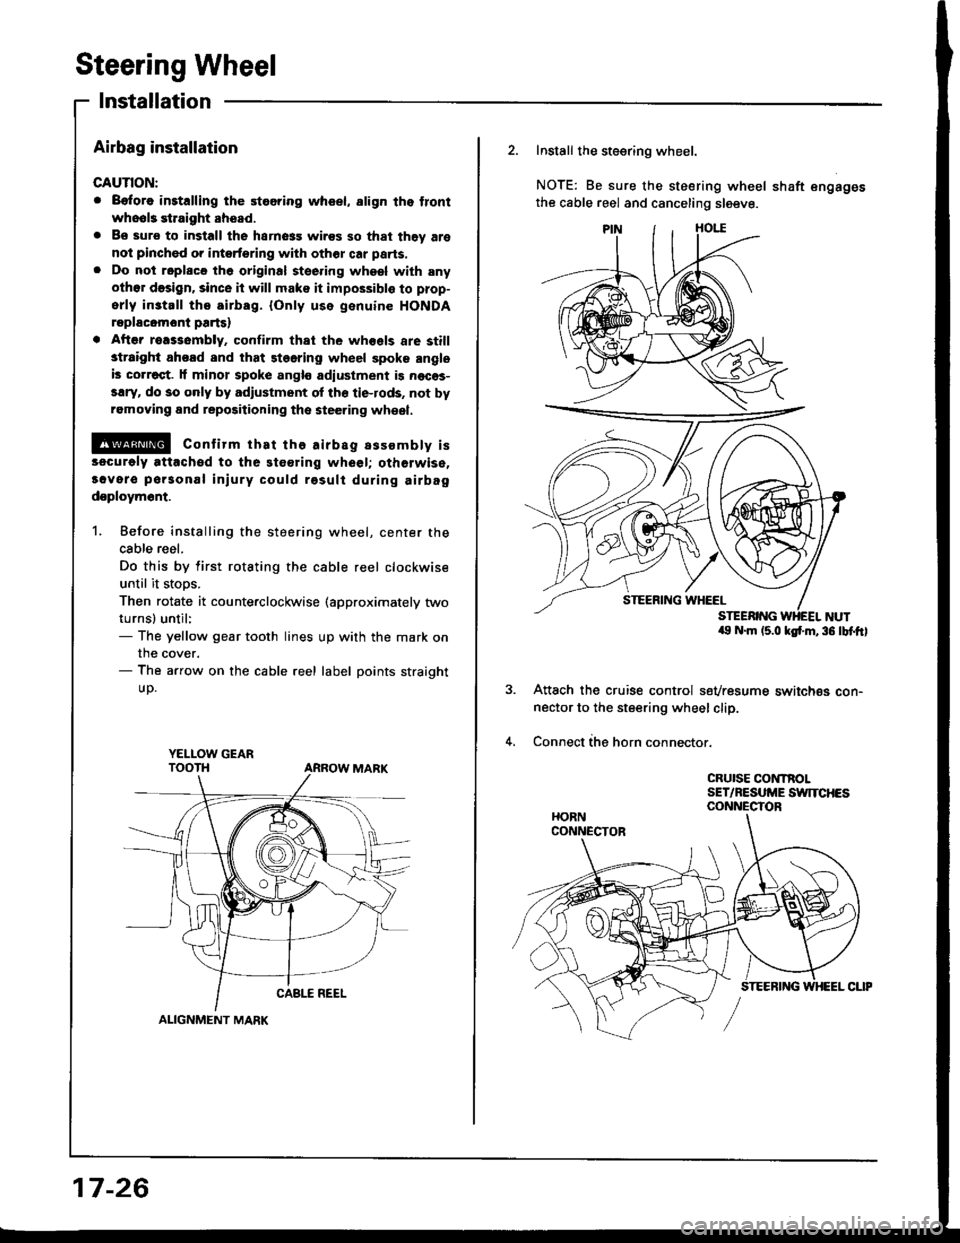 HONDA INTEGRA 1994 4.G Workshop Manual Steering Wheel
Installation
Airbag installation
CAUTION:
. B€fore inrtalling the stooring wheel, align tho front
who6l3 etraight ahead.
. Bo sure to install the harness wires so that thGy are
not pi